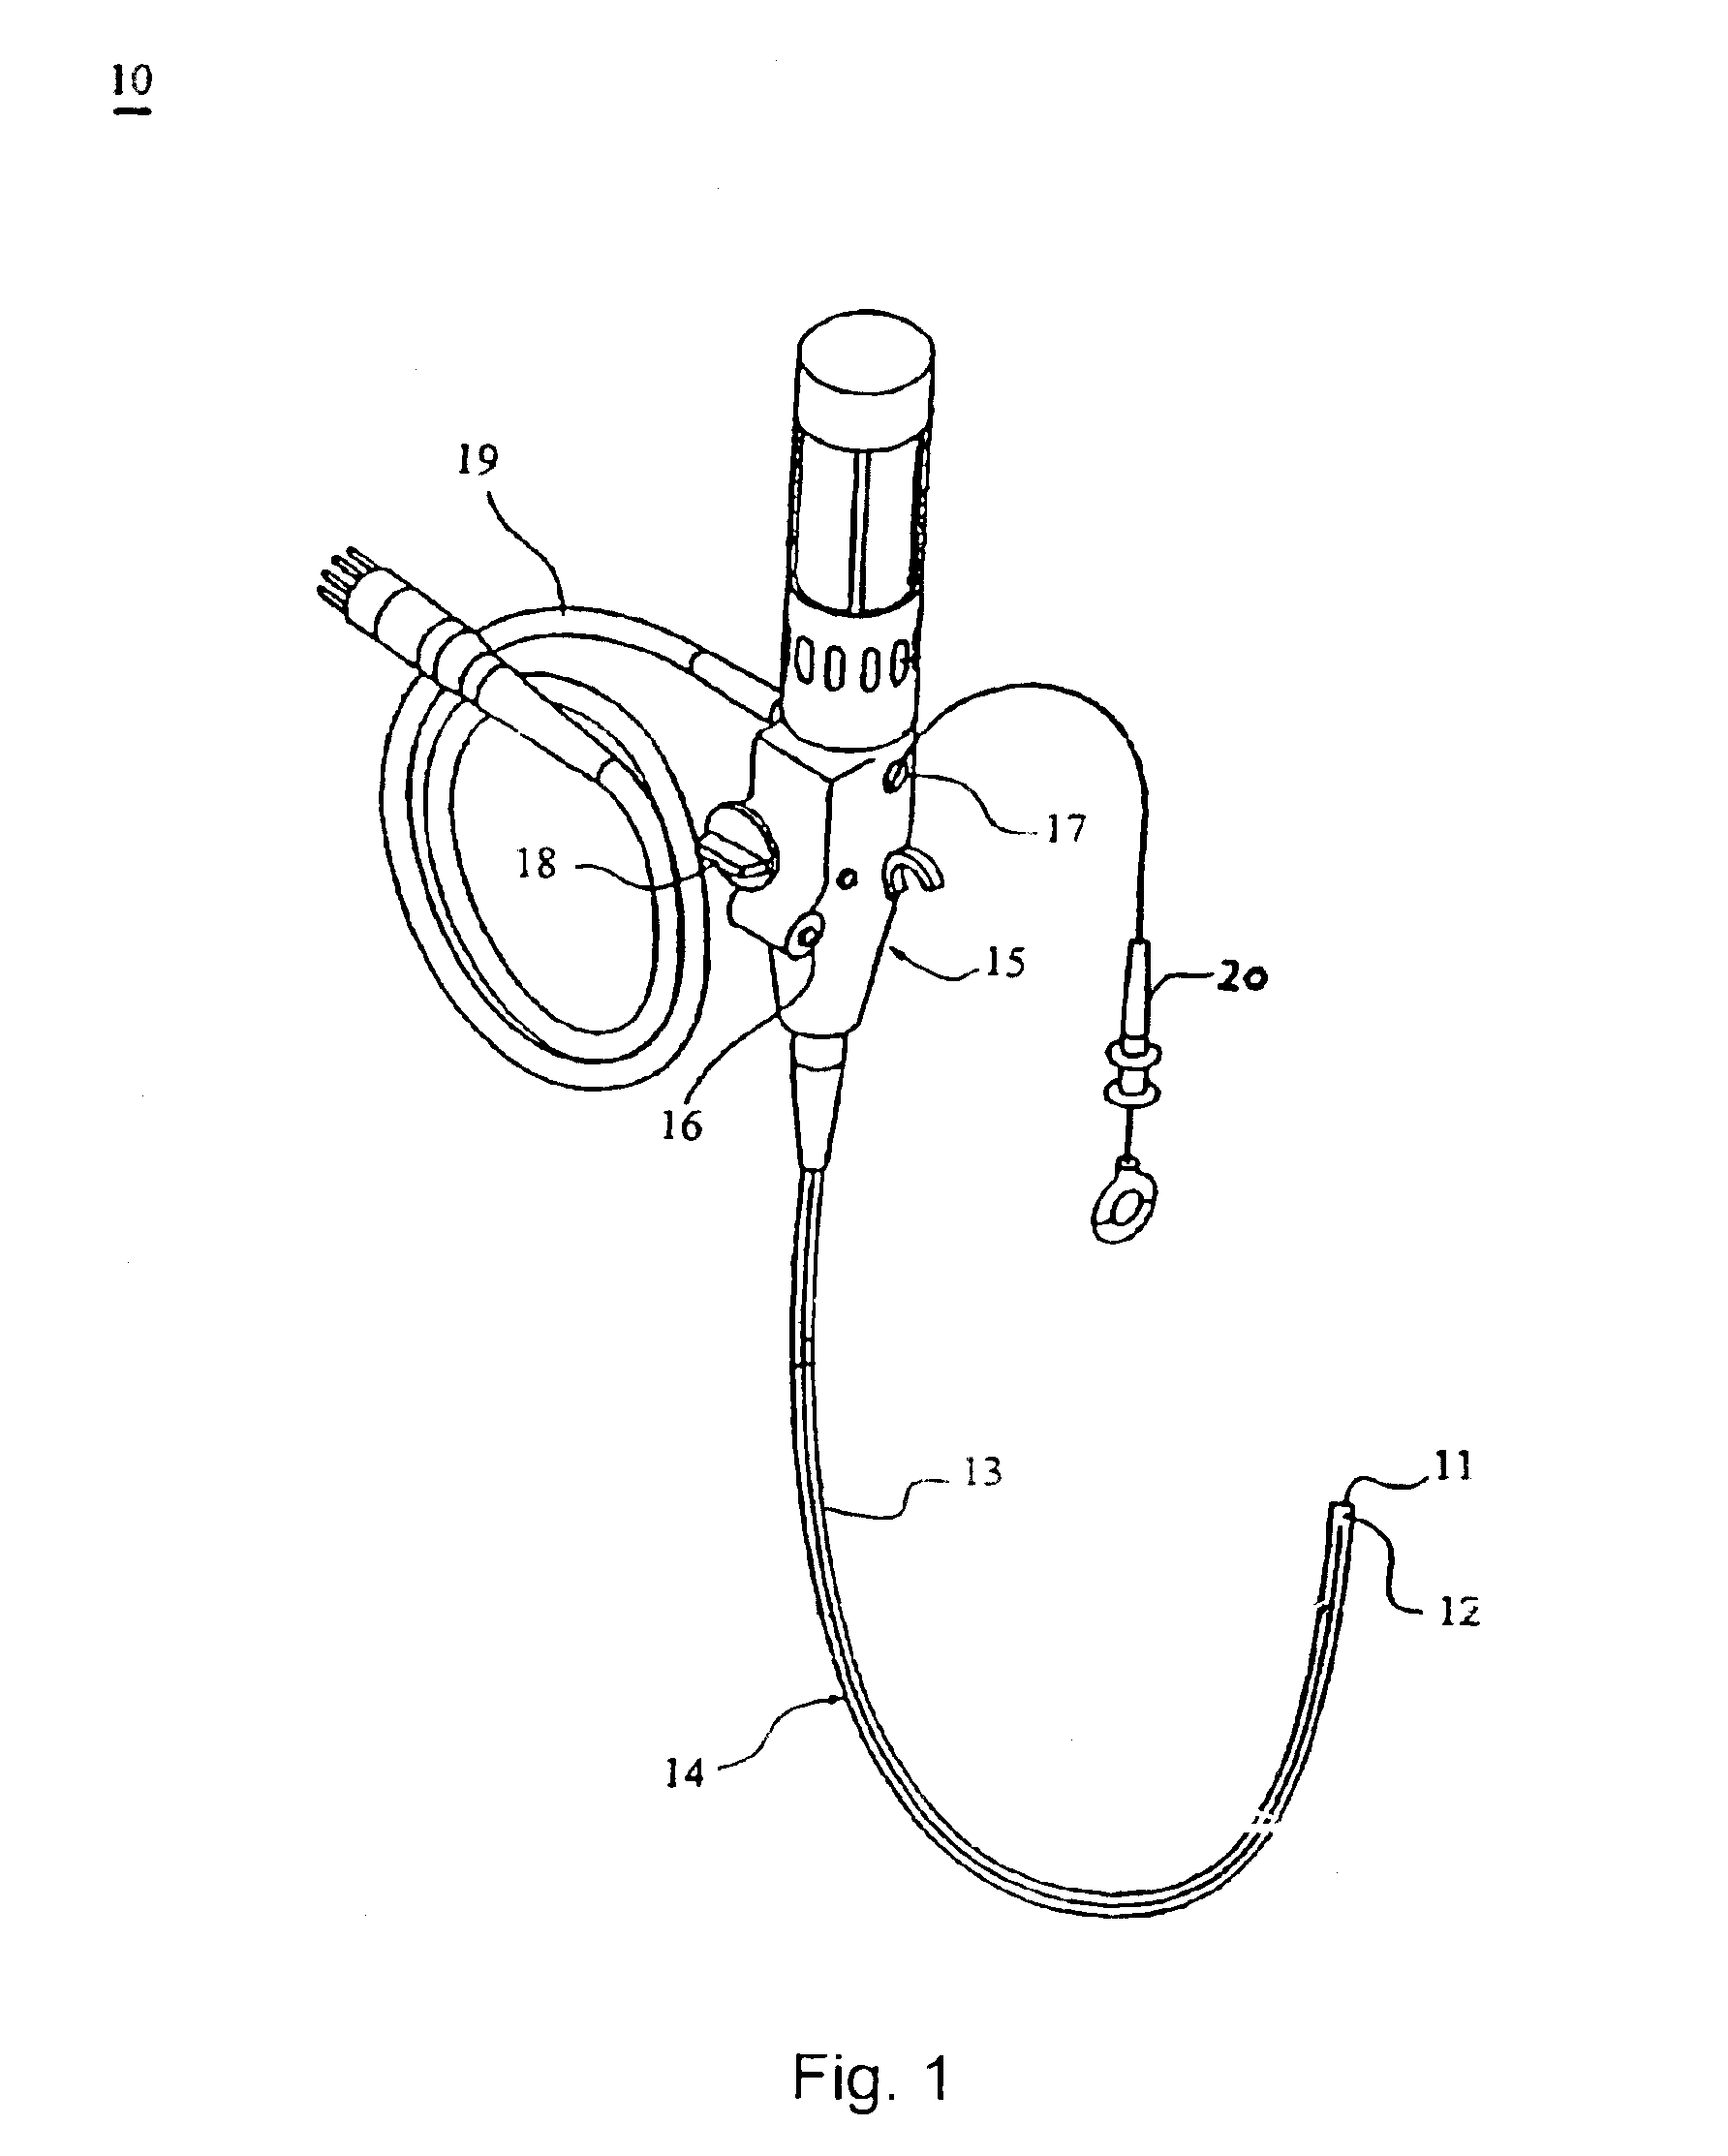 Systems and methods for providing gastrointestinal pain management